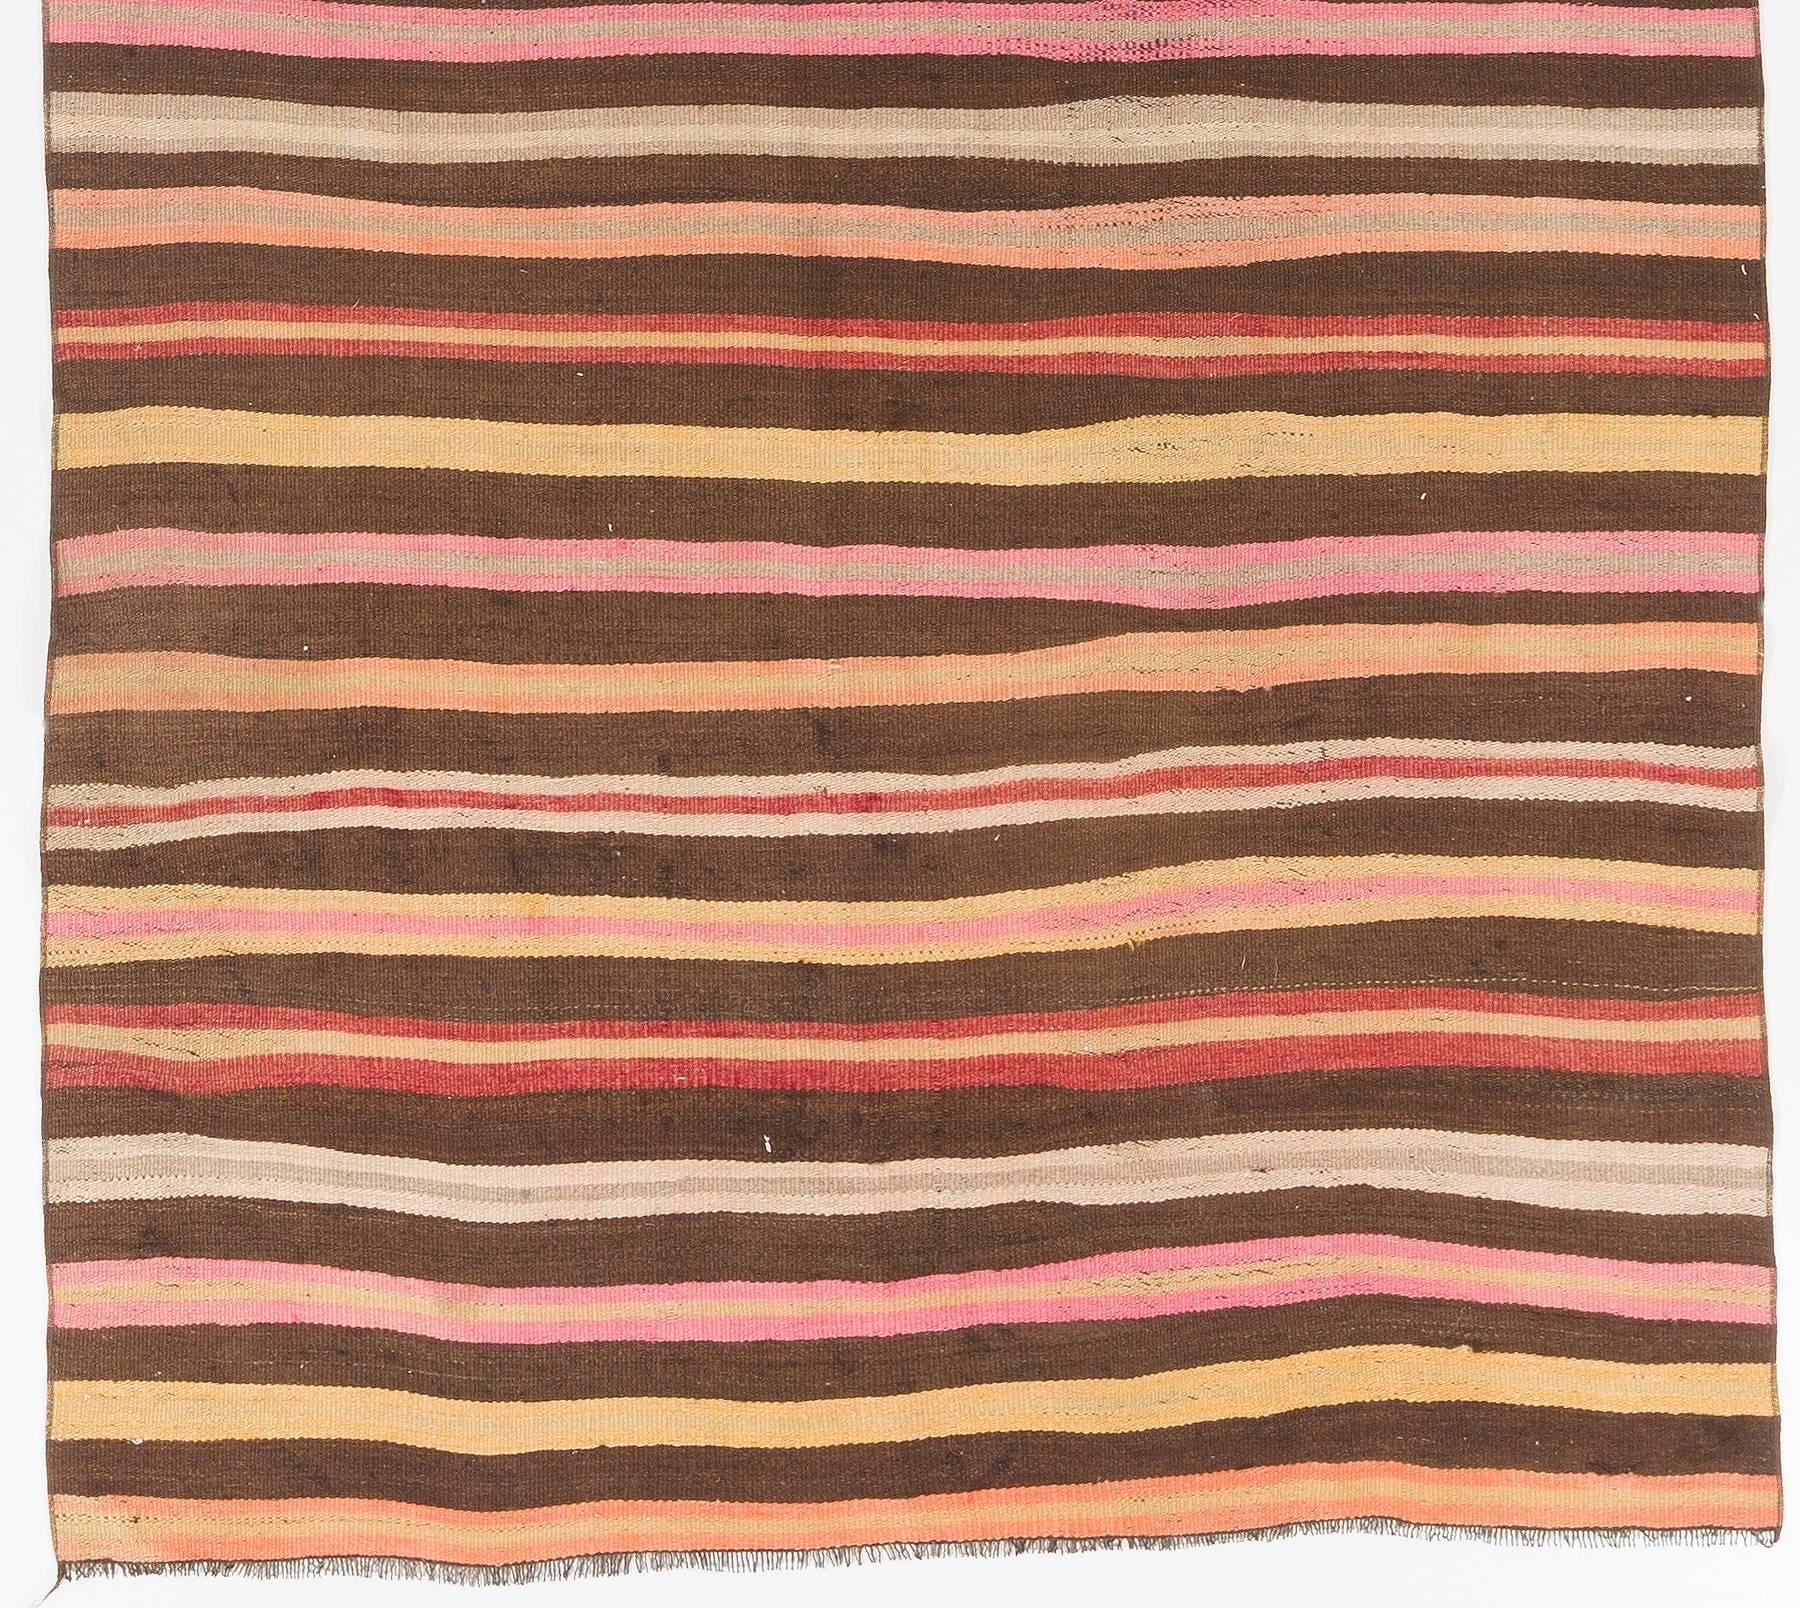 Turkish 5x11.8 Ft Handmade Kilim Runner with Soft Green, Yellow, Brown and Pink Stripes For Sale